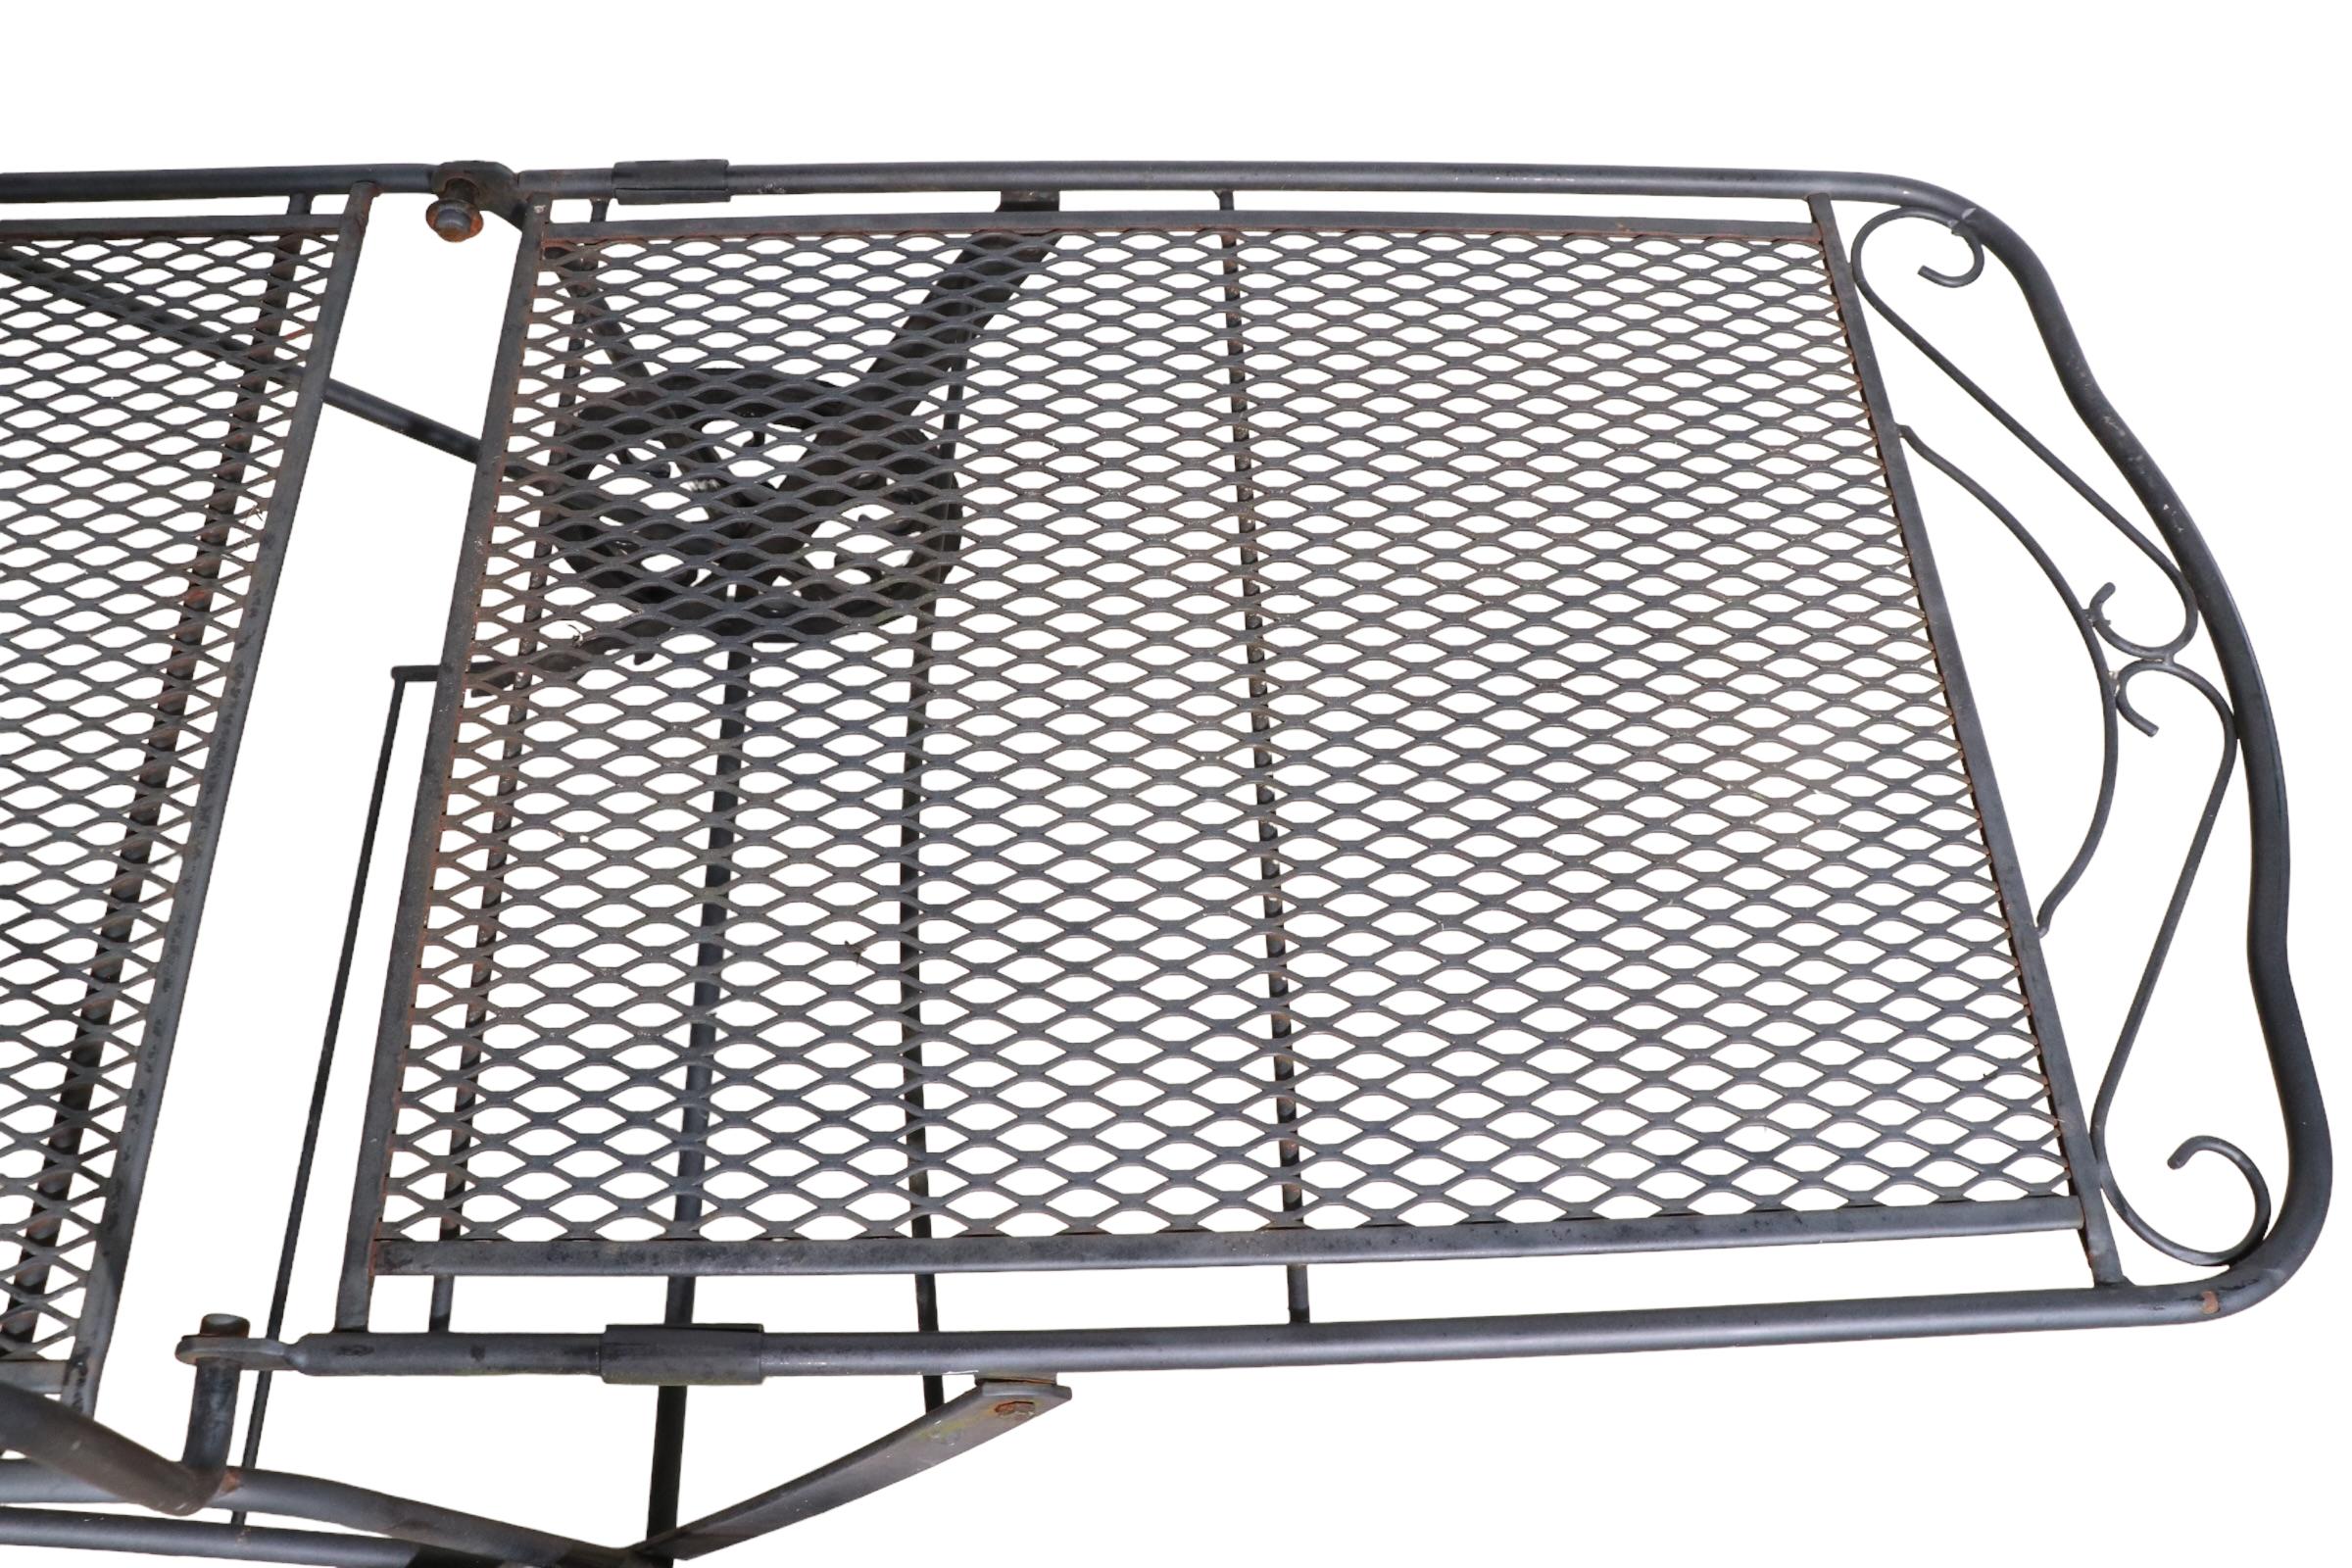 Stylish wrought iron and metal mesh adjustable chaise lounge attributed to the Woodard Furniture Company. The chaise has a reclining backrest, and wheels to easily move the piece. Perfect for poolside, patio, or garden use, suitable for both indoor